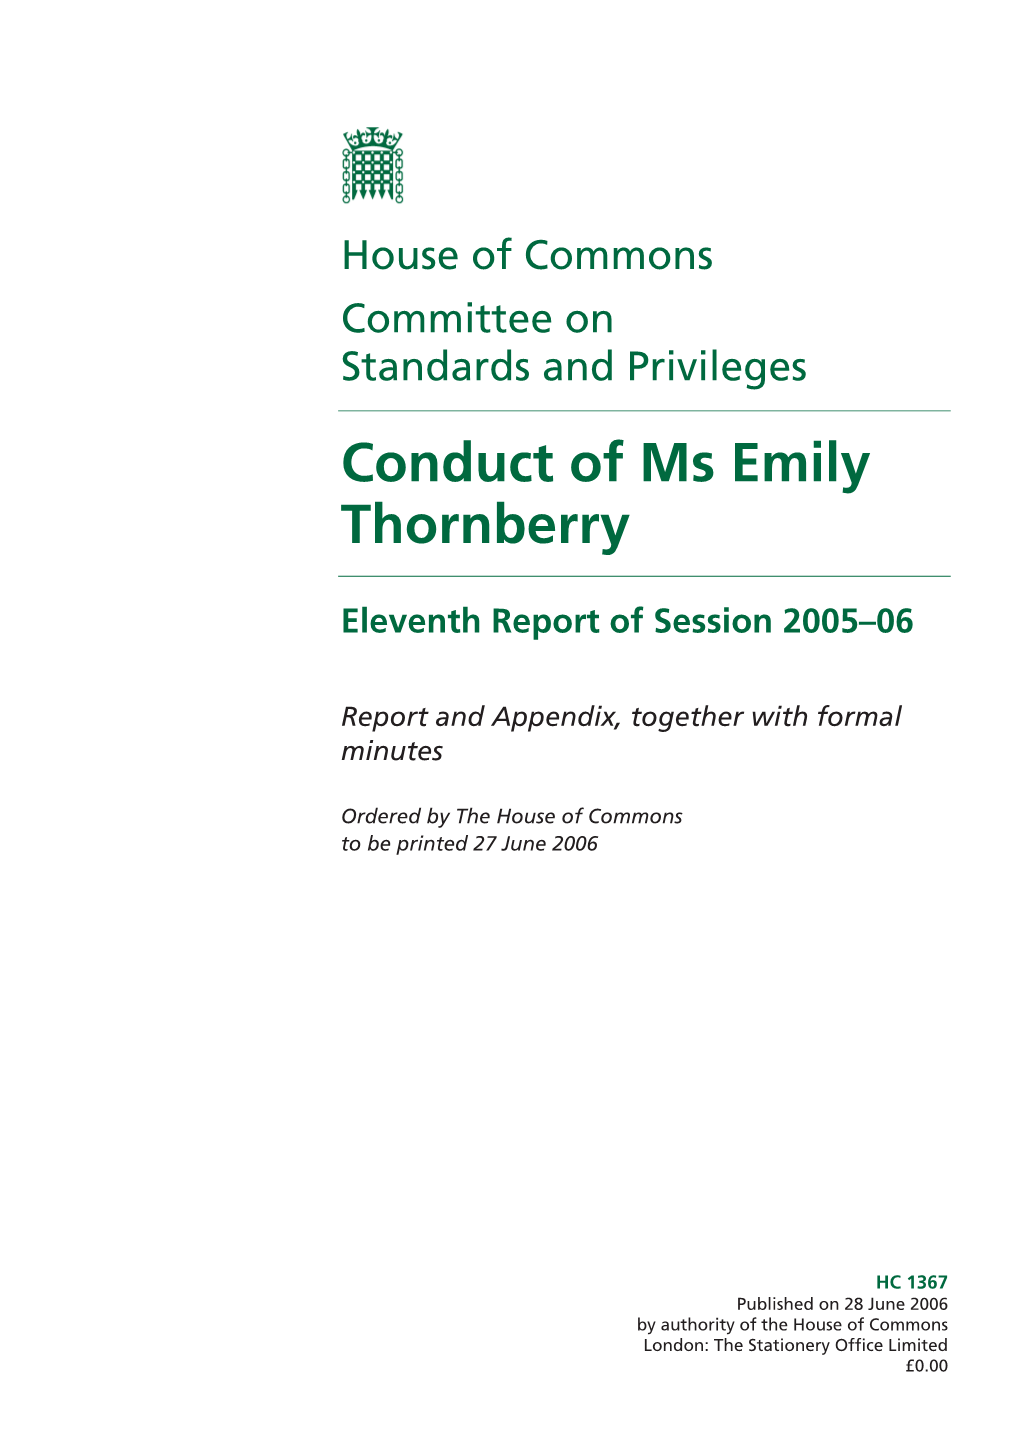 Conduct of Ms Emily Thornberry